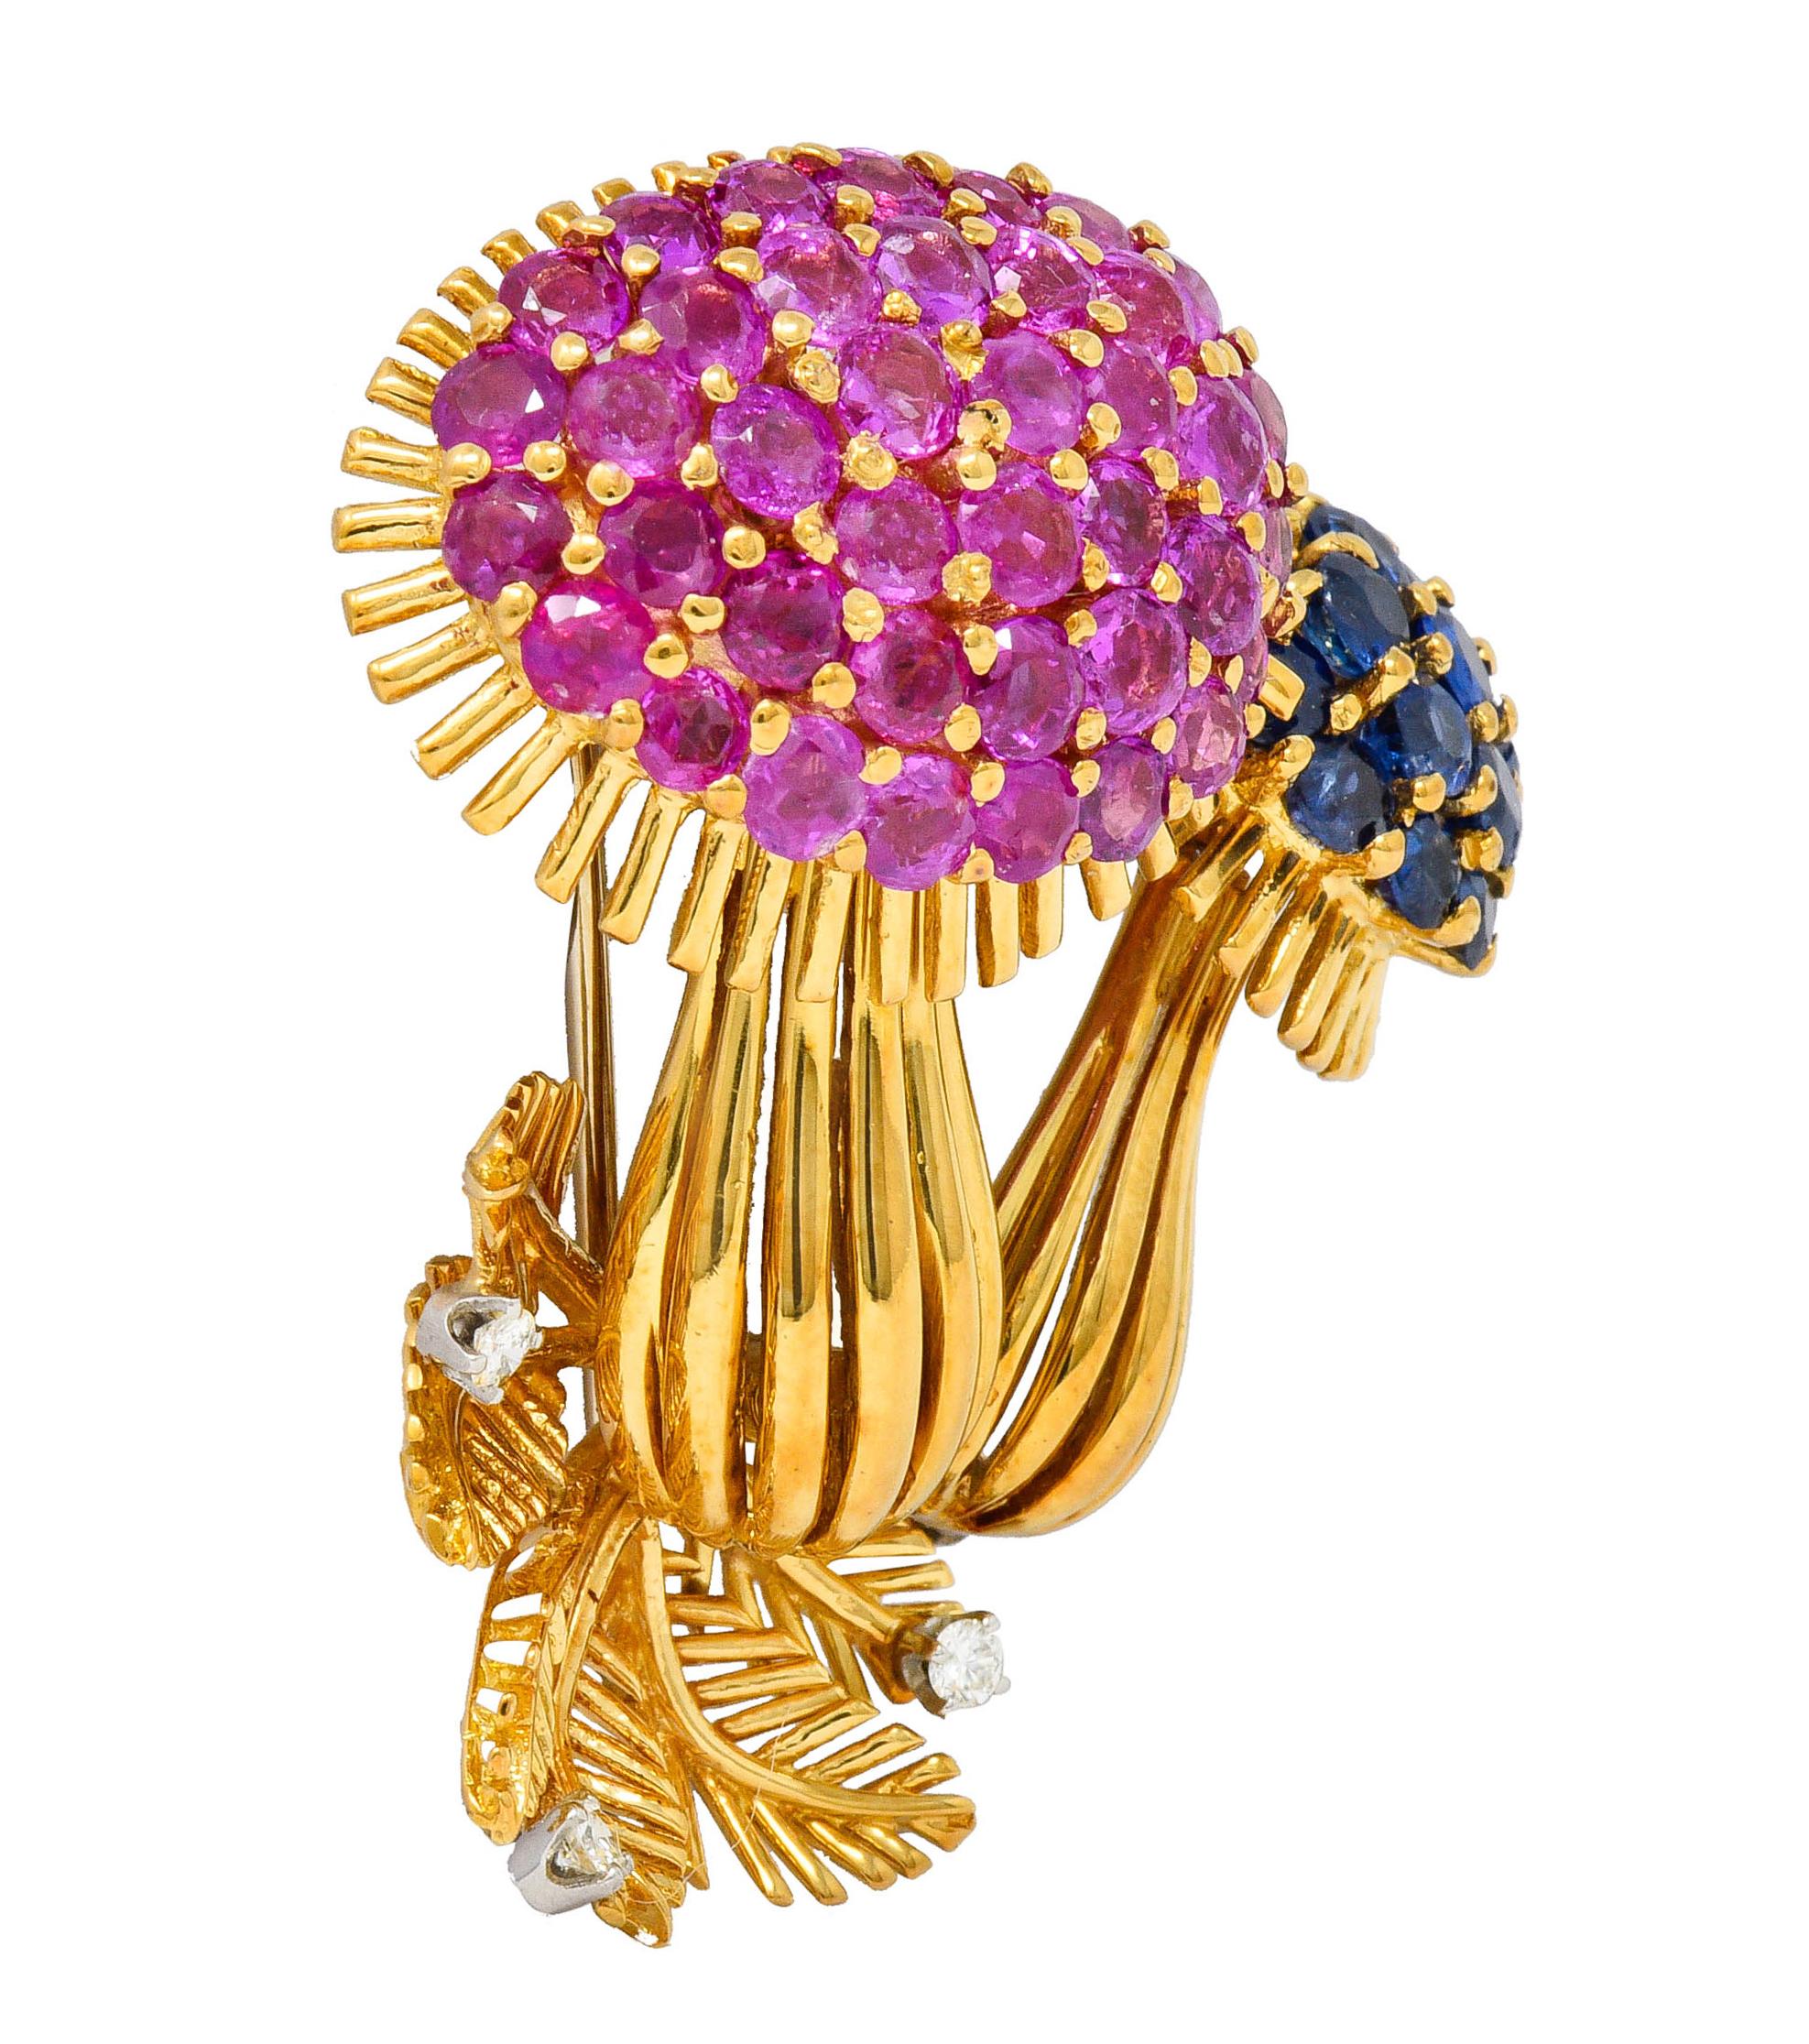 Brooch is designed as two mushrooms with stylized gold wire composition

Mushroom tops are prong set with bright pink and blue sapphires that weigh in total approximately 8.50 carats

With a concave fern formation at base accented by three round